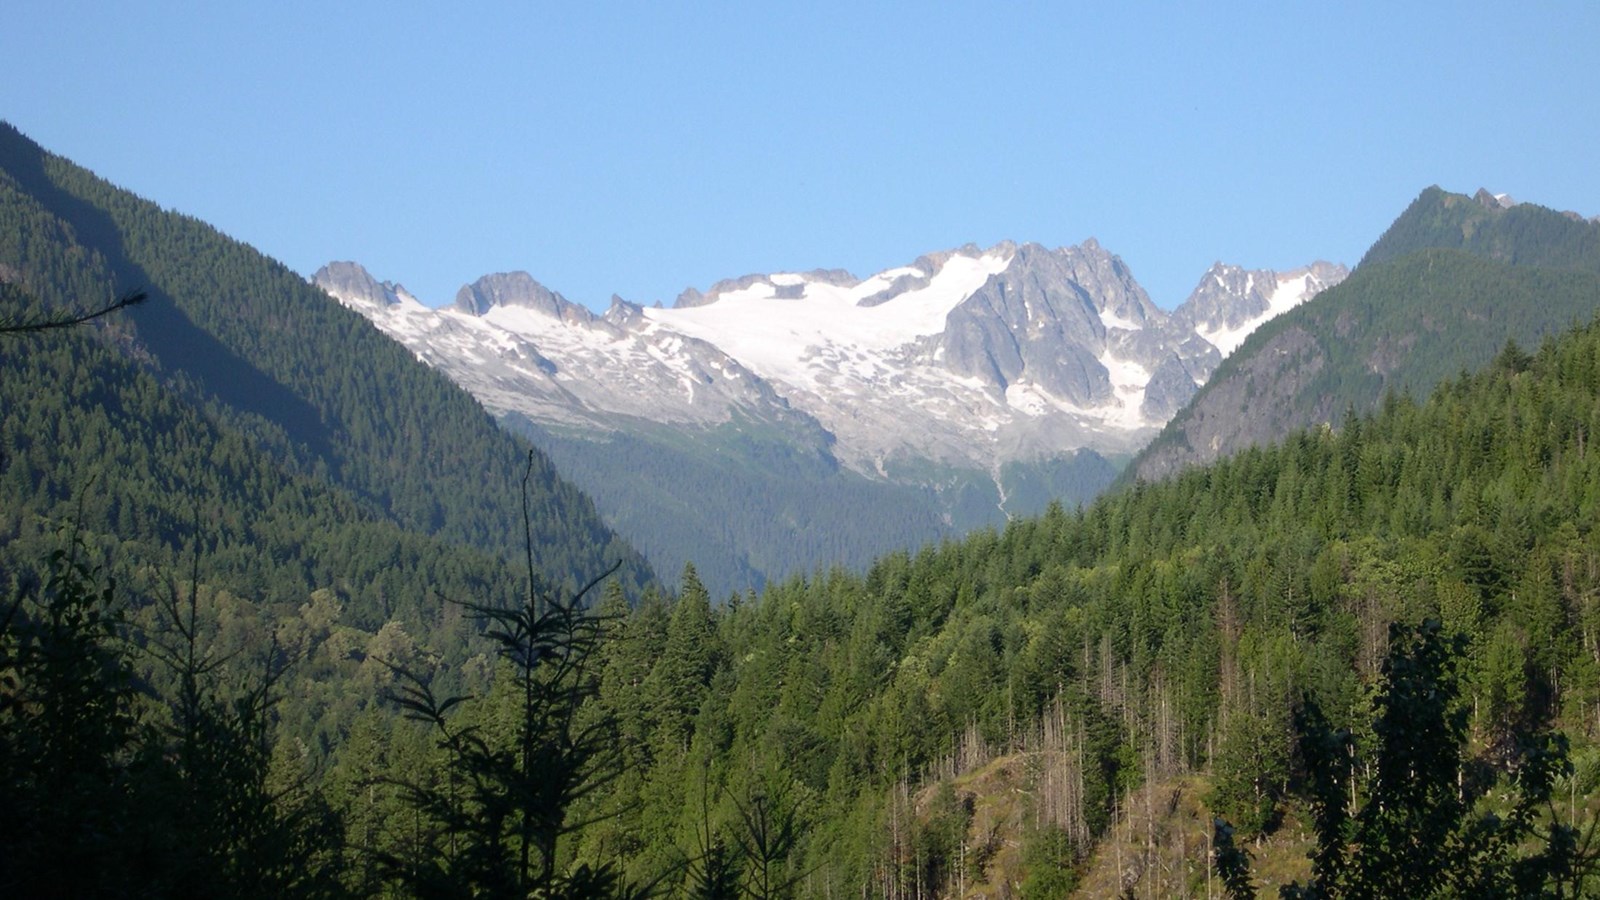 View of a distant mountain with forested slopes in the foreground.